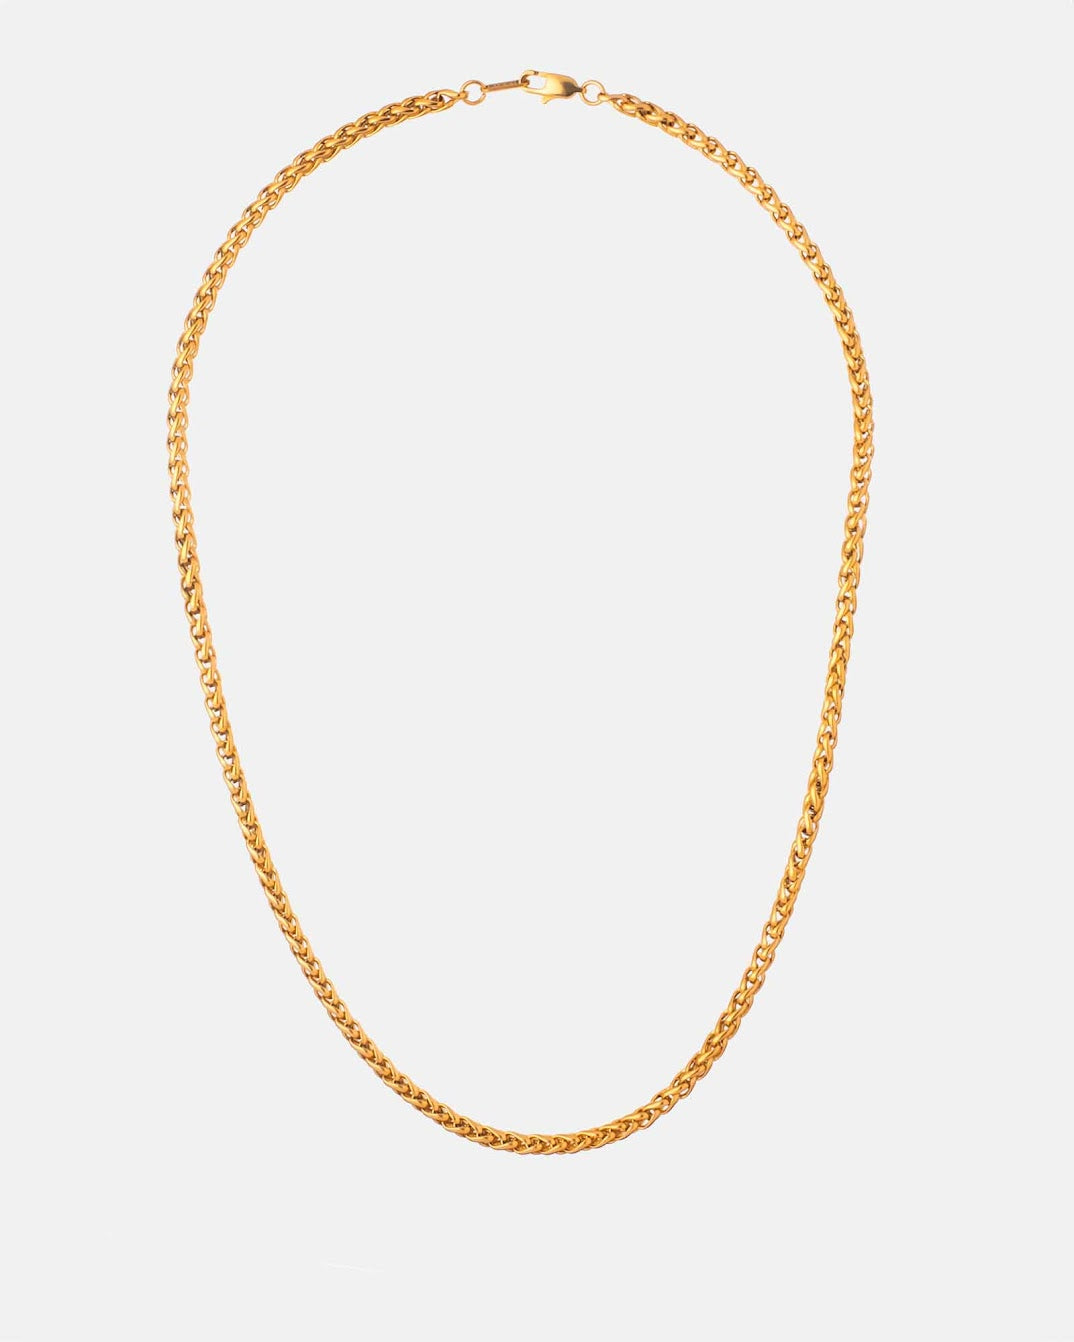 The Golden Wheat Chain Necklace 5mm by Dicci, 316L stainless steel piece, handcrafted and waterproof. A timeless design.